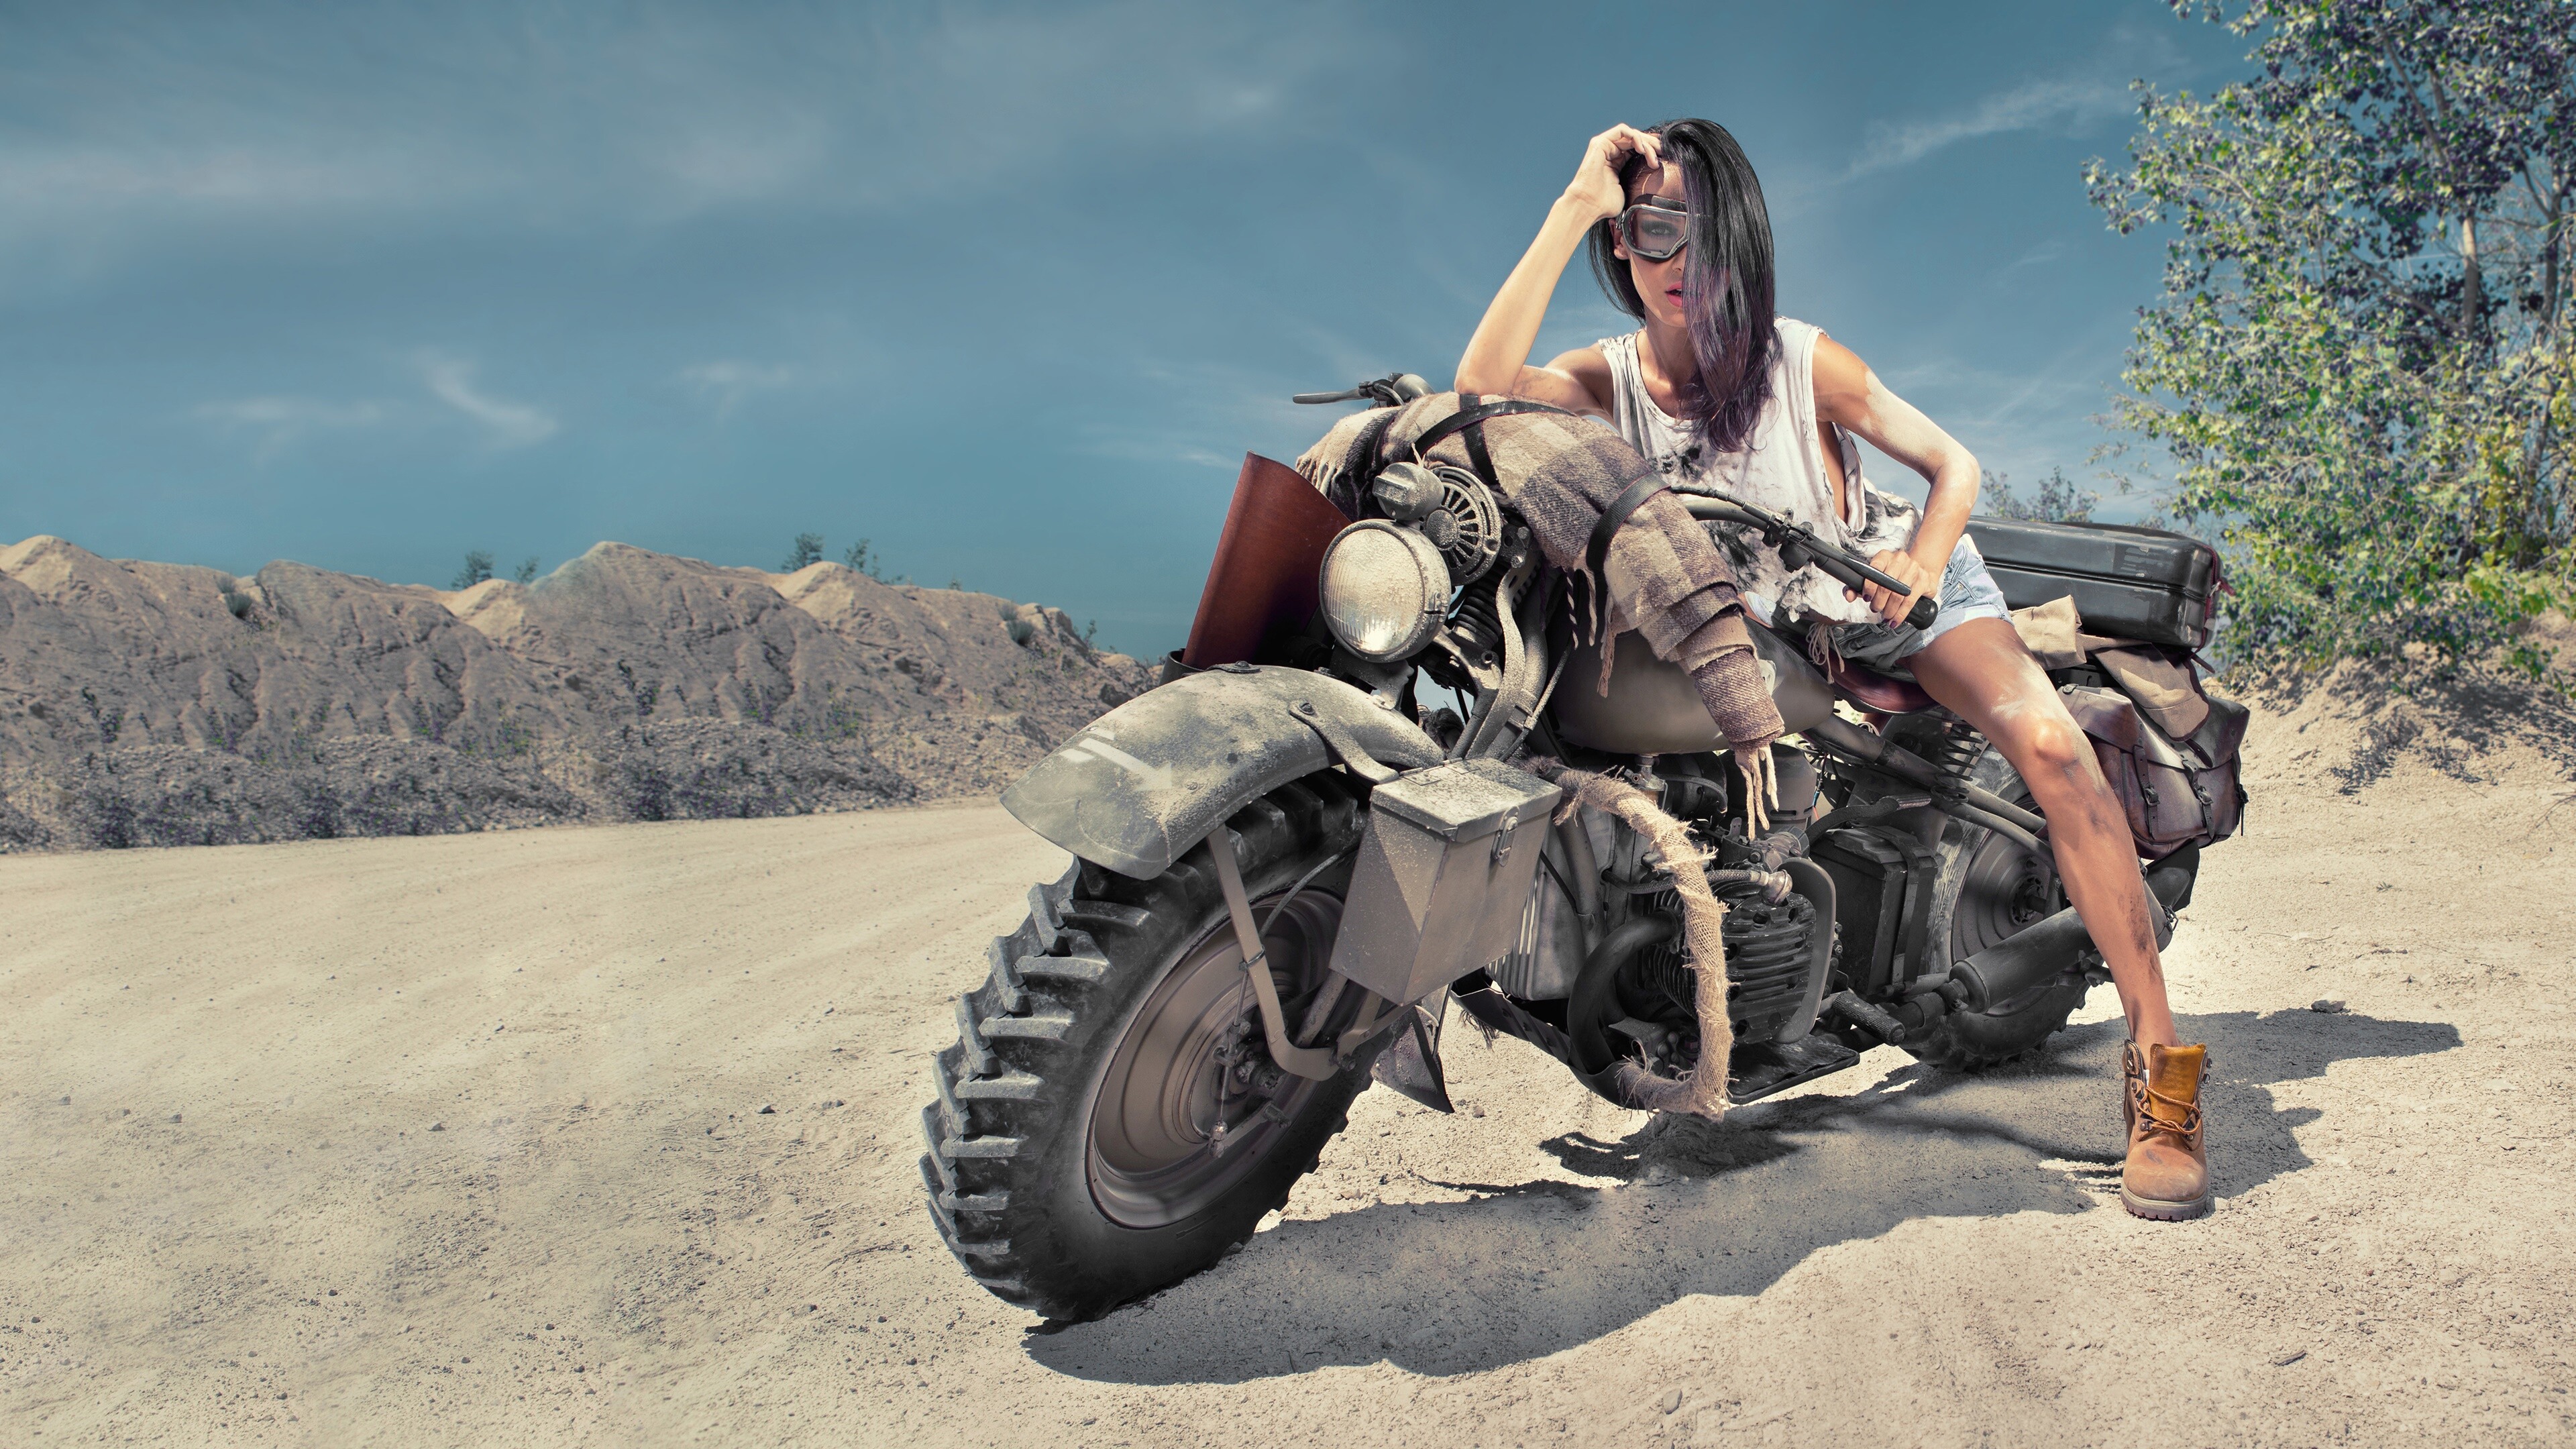 Girls and Motorcycles: Desert bike, Venturing off-road, A girl riding the dirt bike in the sand dunes. 3840x2160 4K Wallpaper.